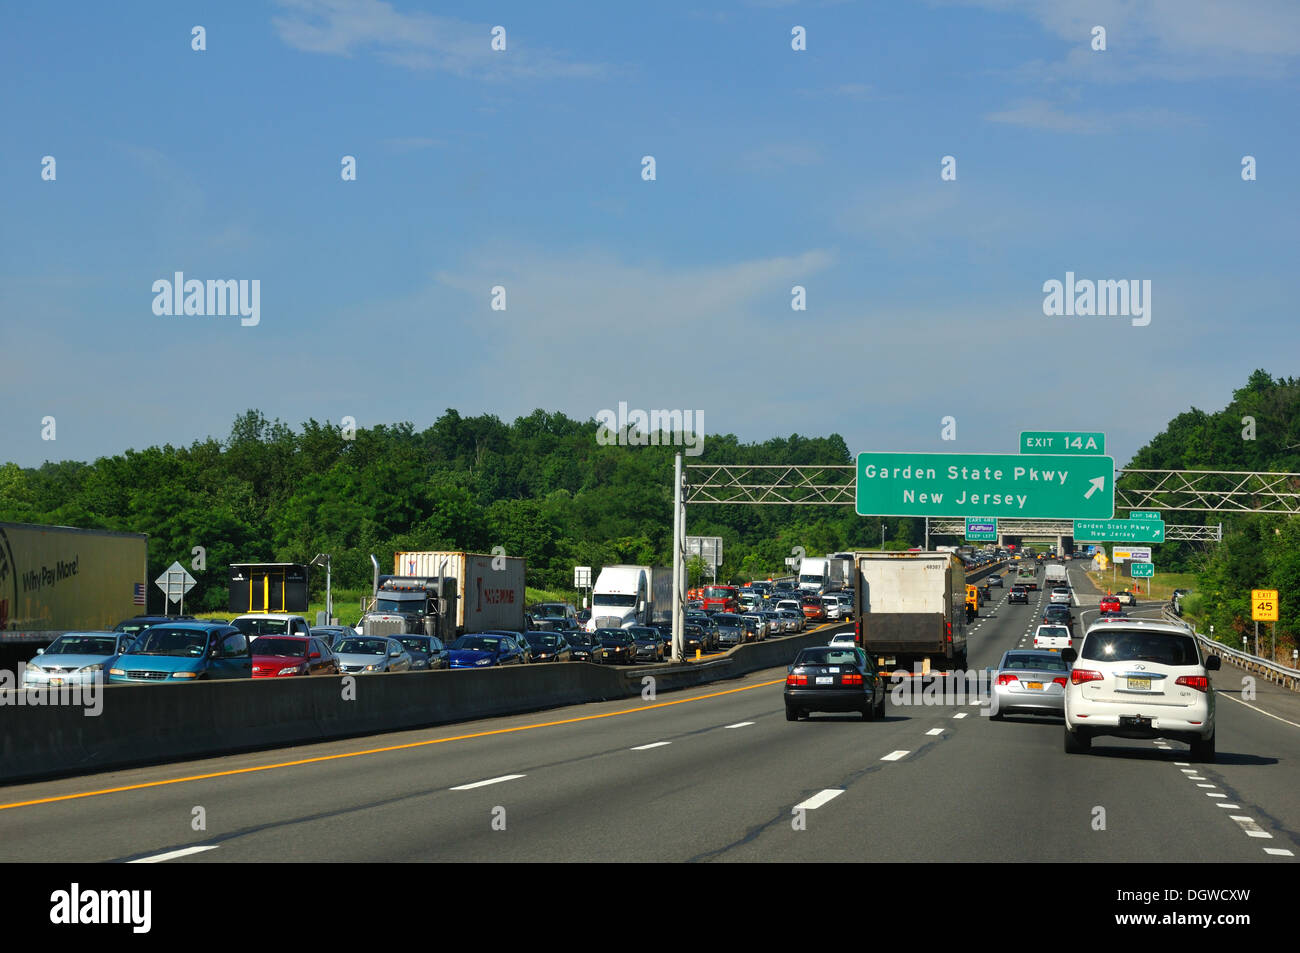 Traffic Jam On A Highway In New Jersey Usa Stock Photo 62024561